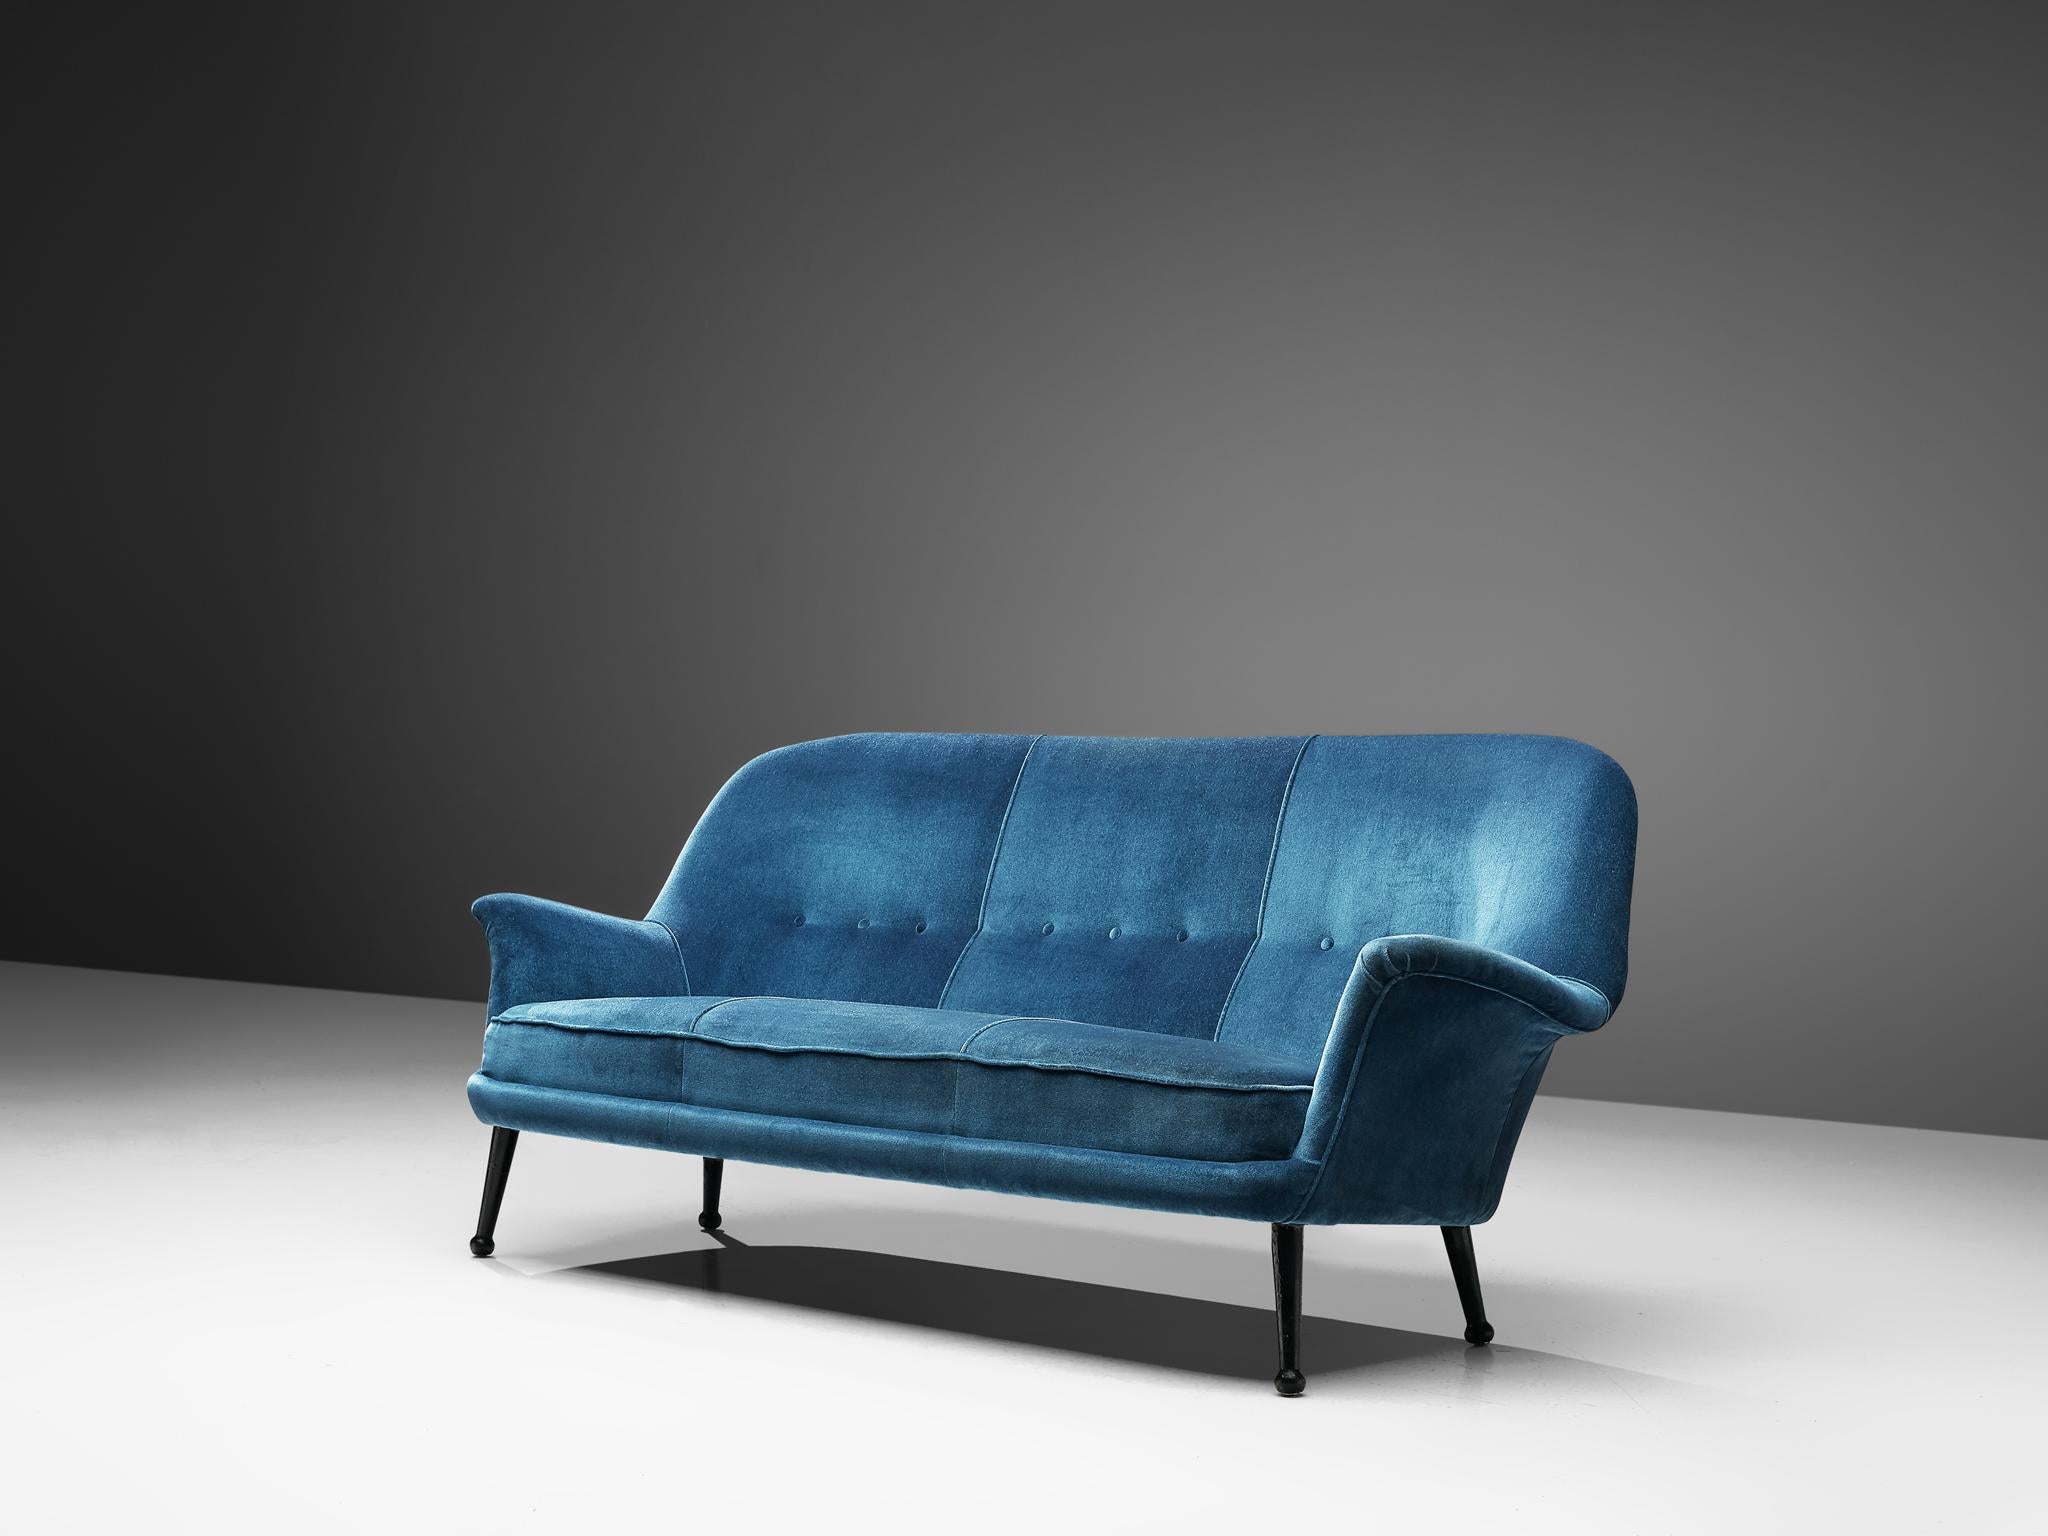 Arne Norell, sofa, fabric and wood, Sweden, 1950s

This free-standing three-seat sofa is currently upholstered in blue velvet upholstery that highights the beautiful shape. On four characteristic legs in the shape of drumsticks a seat with thick